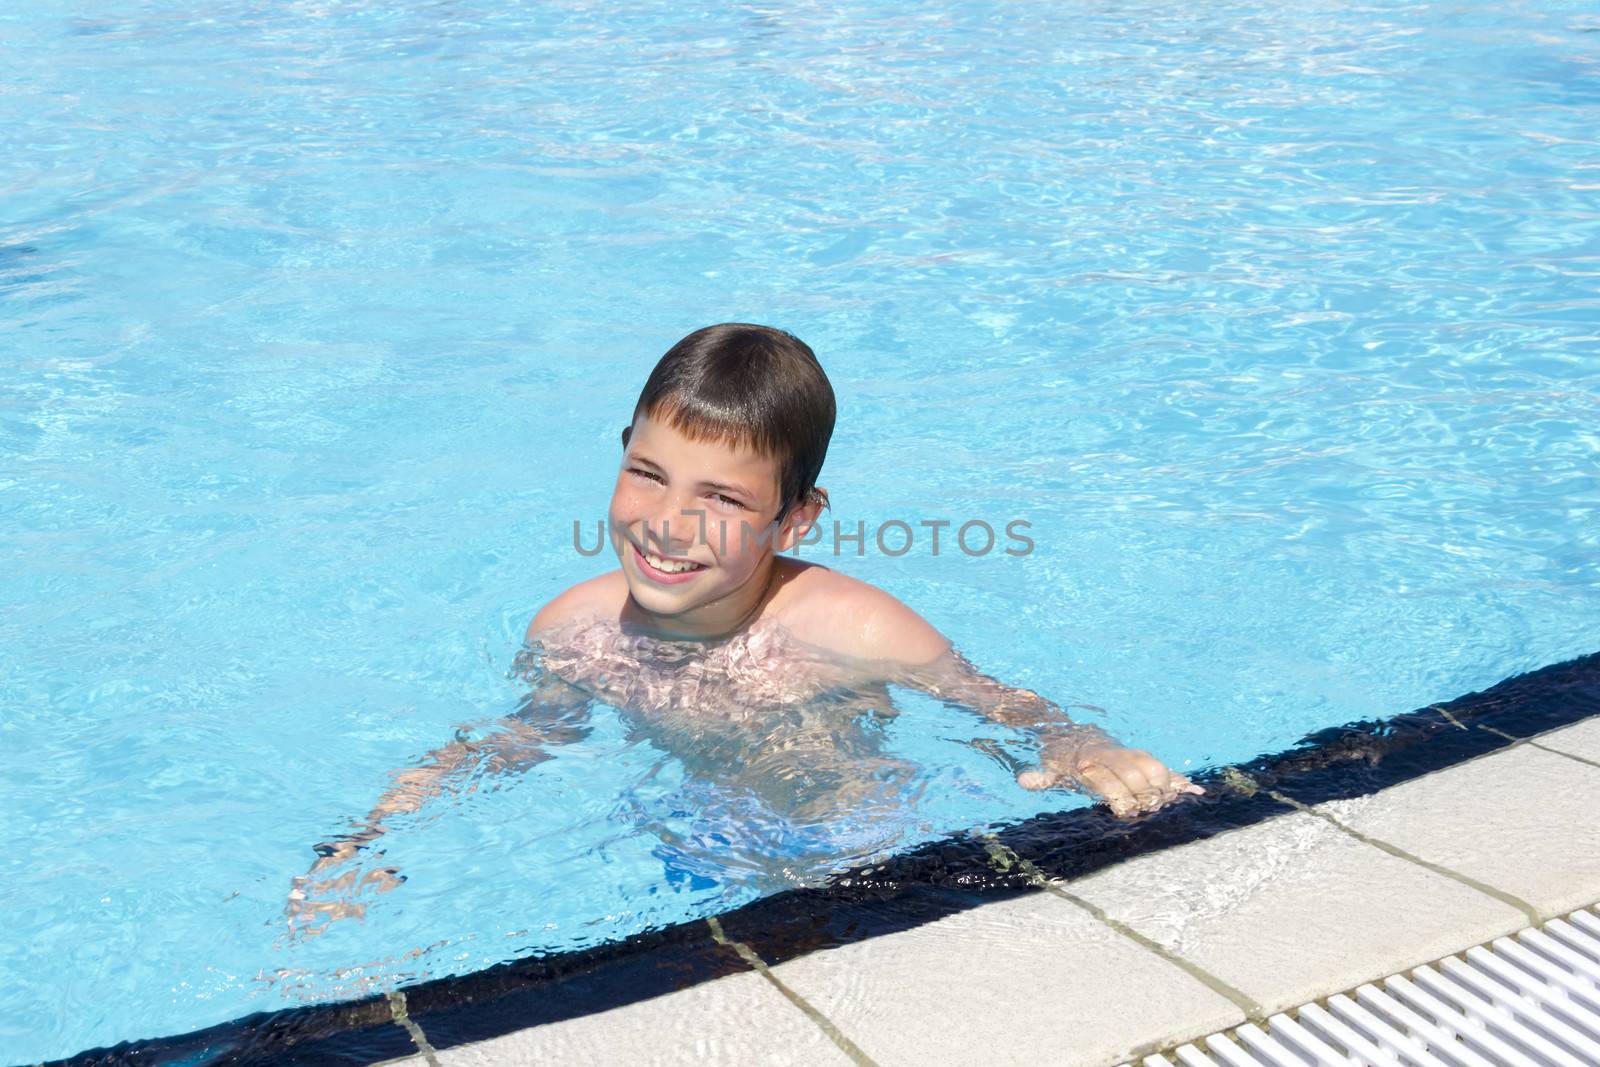 Activities on the pool. Cute boy swimming and playing in water i by Tetyana